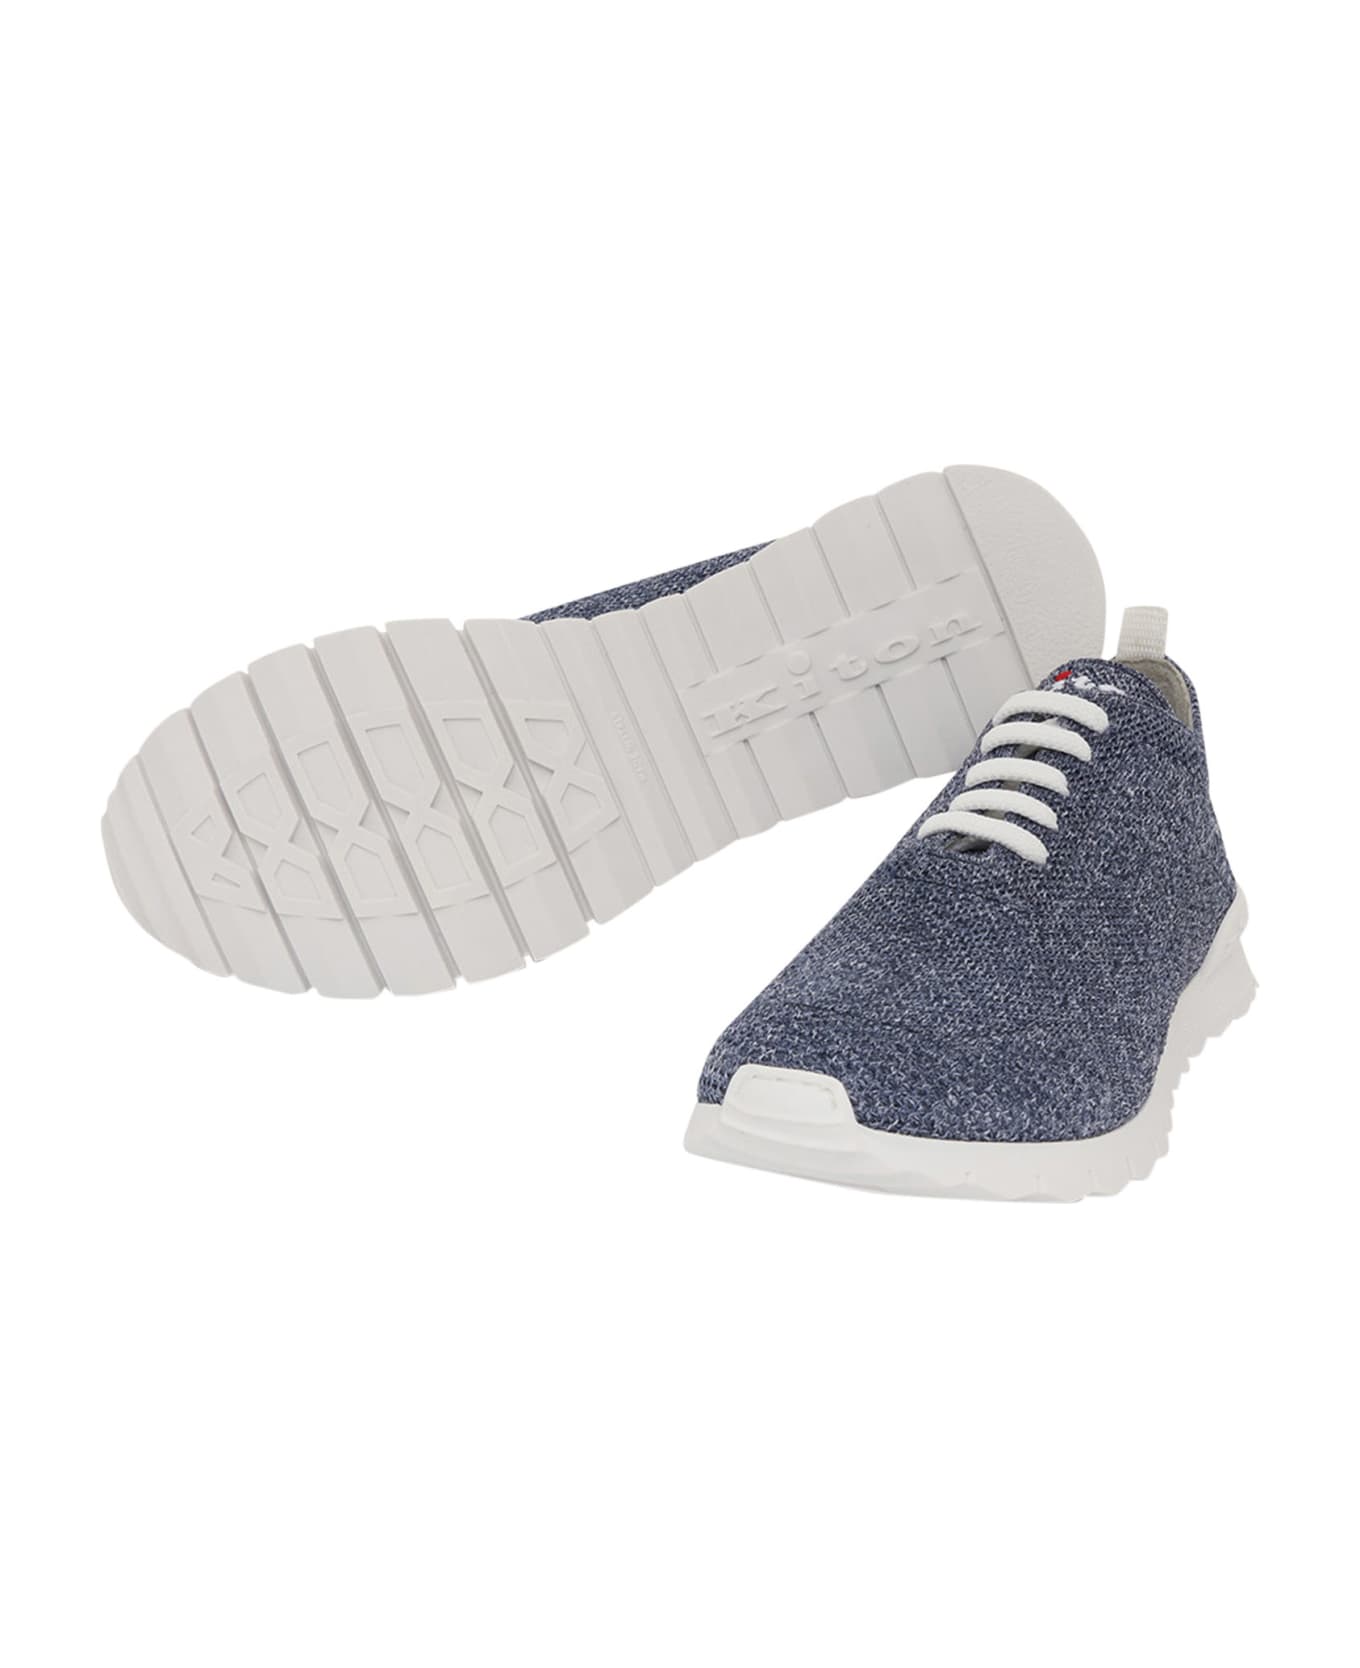 Kiton Fits - Sneakers Shoes Cotton - BLUE